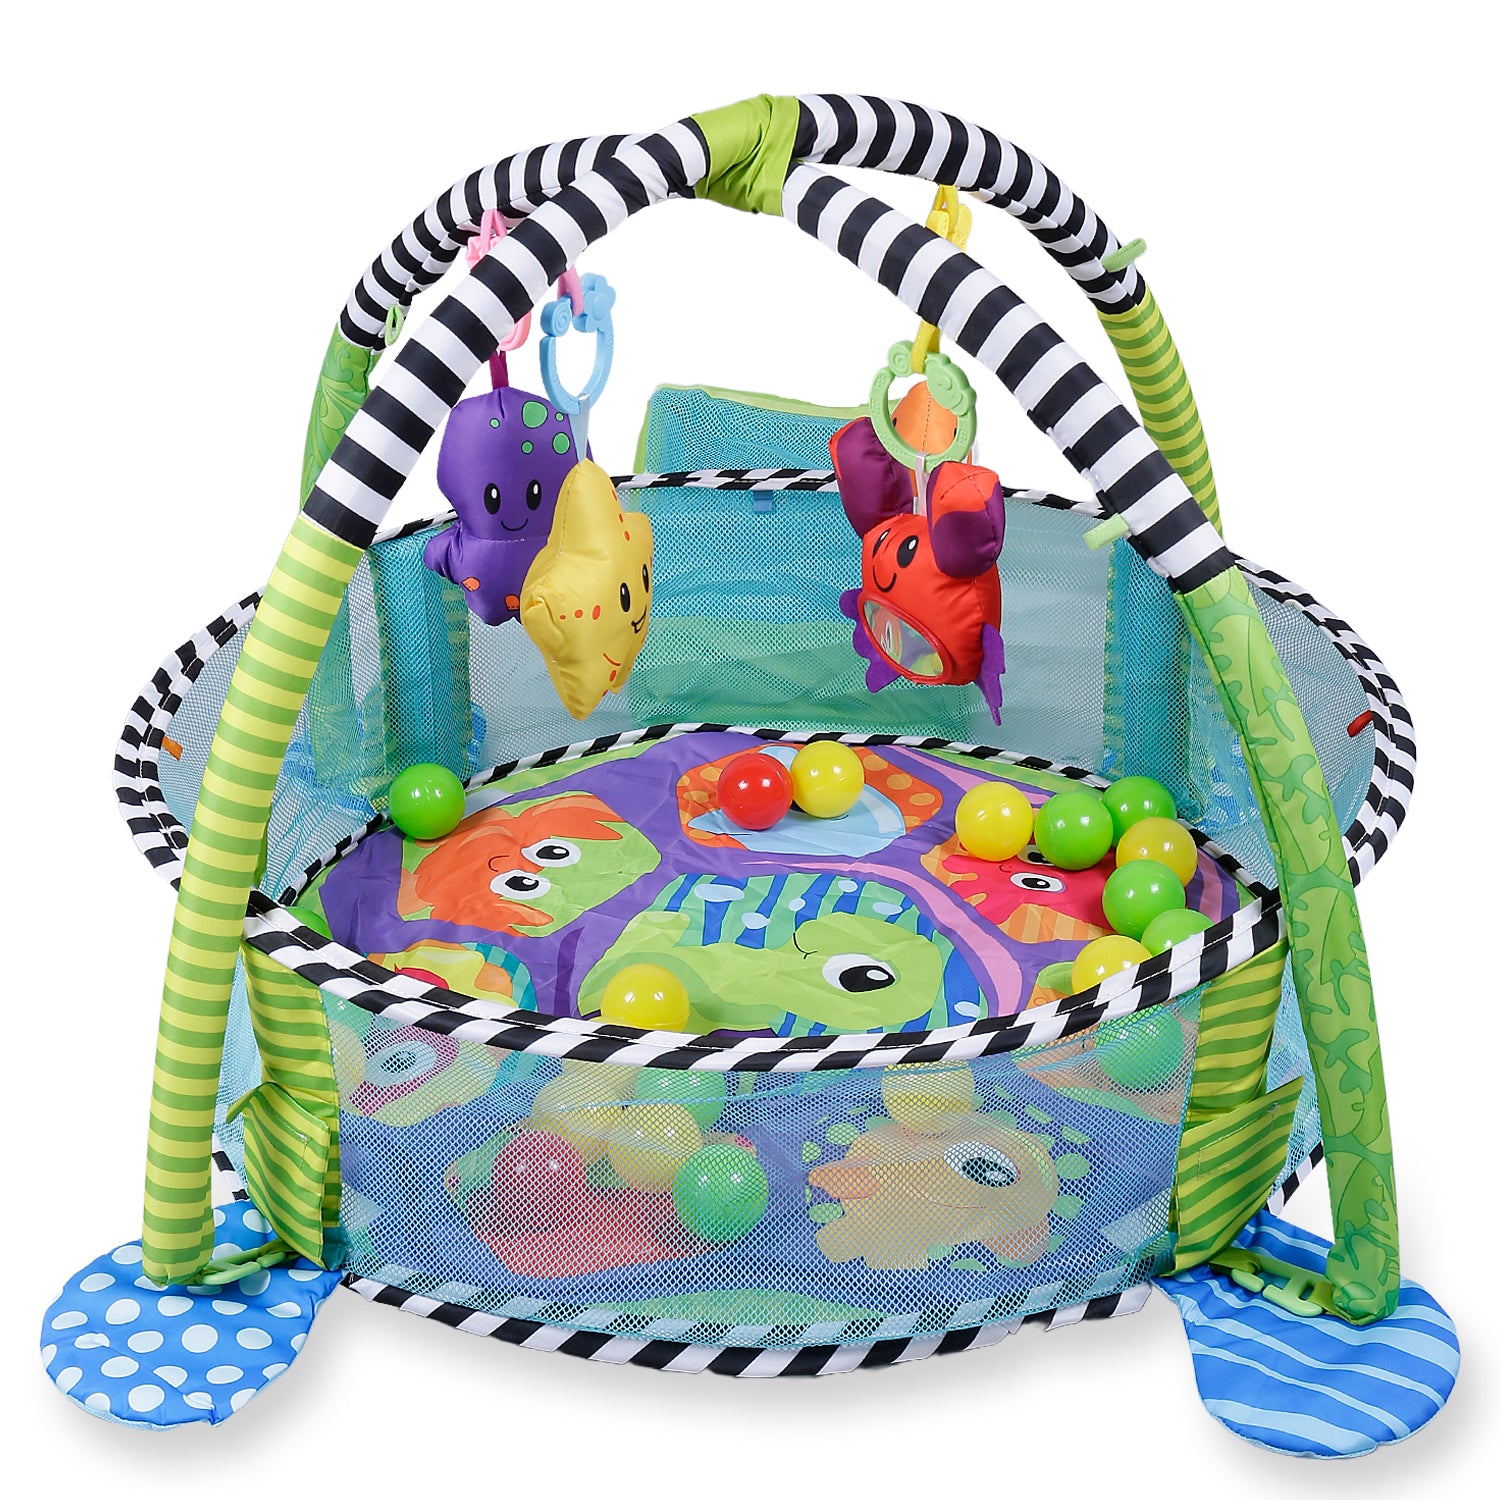 Turtle Infant Play Mat Activity Gym With Hanging Toys And Balls - Green